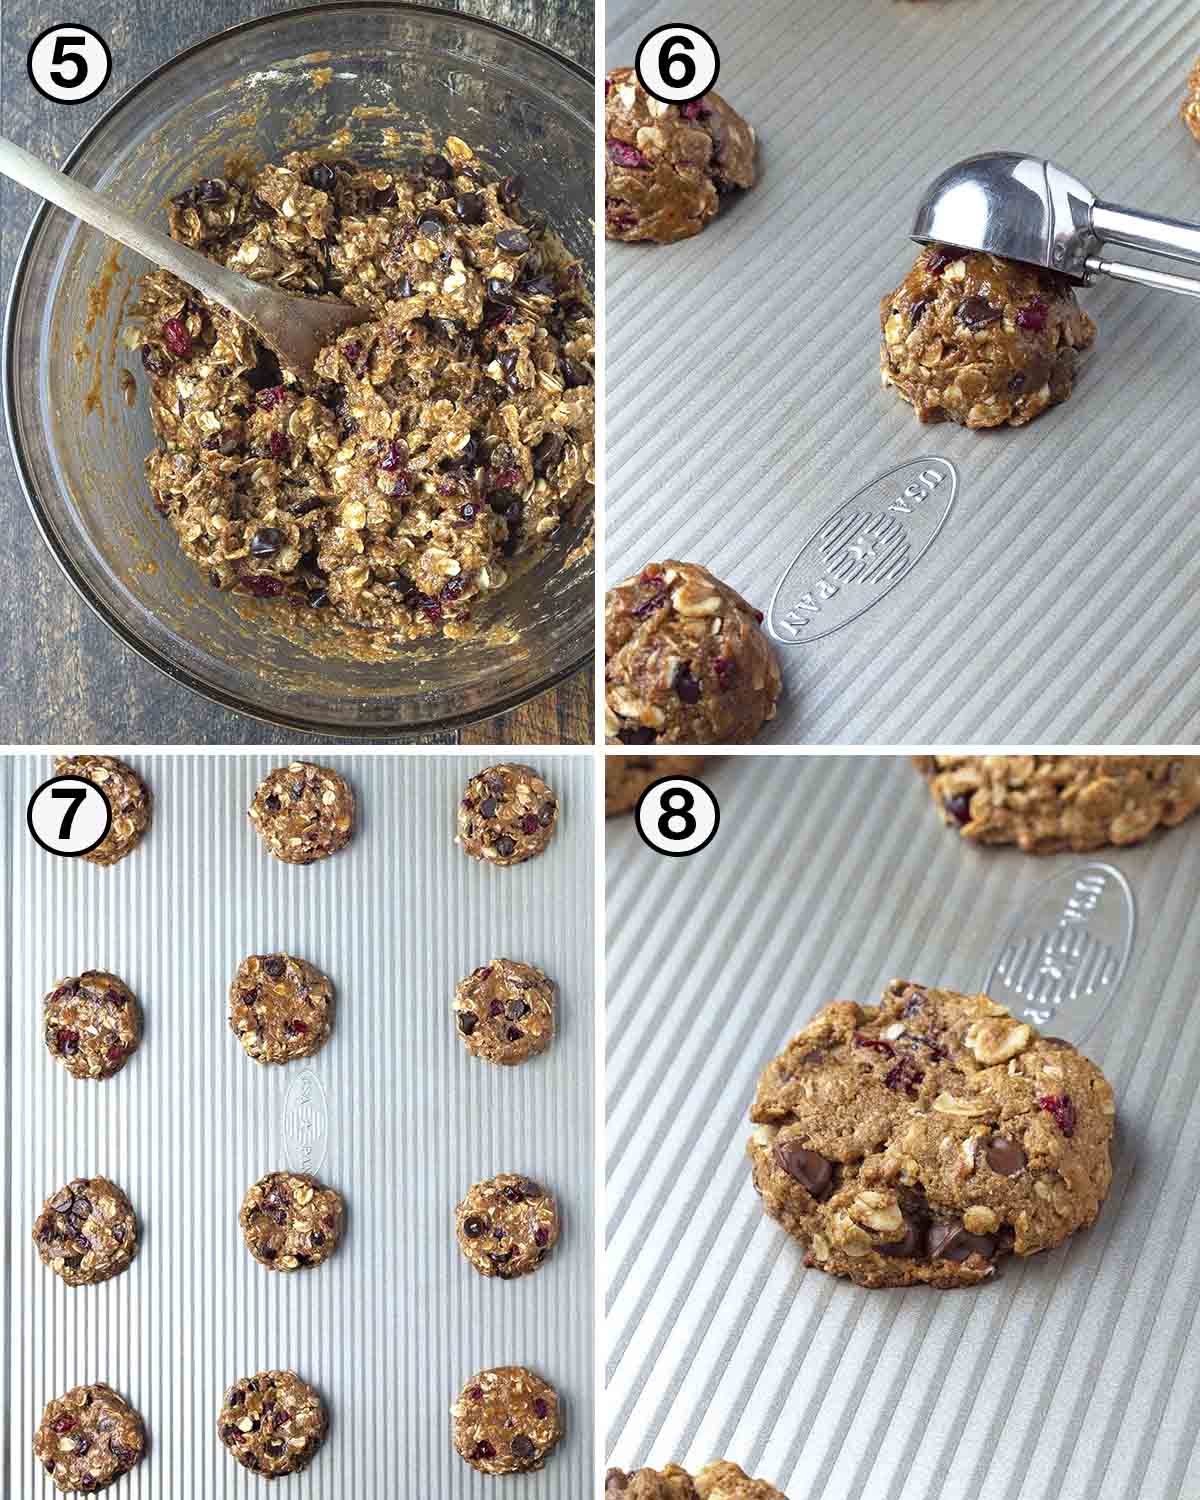 A collage of four images showing the second sequence of steps needed to make vegan gluten-free oatmeal cranberry cookies.